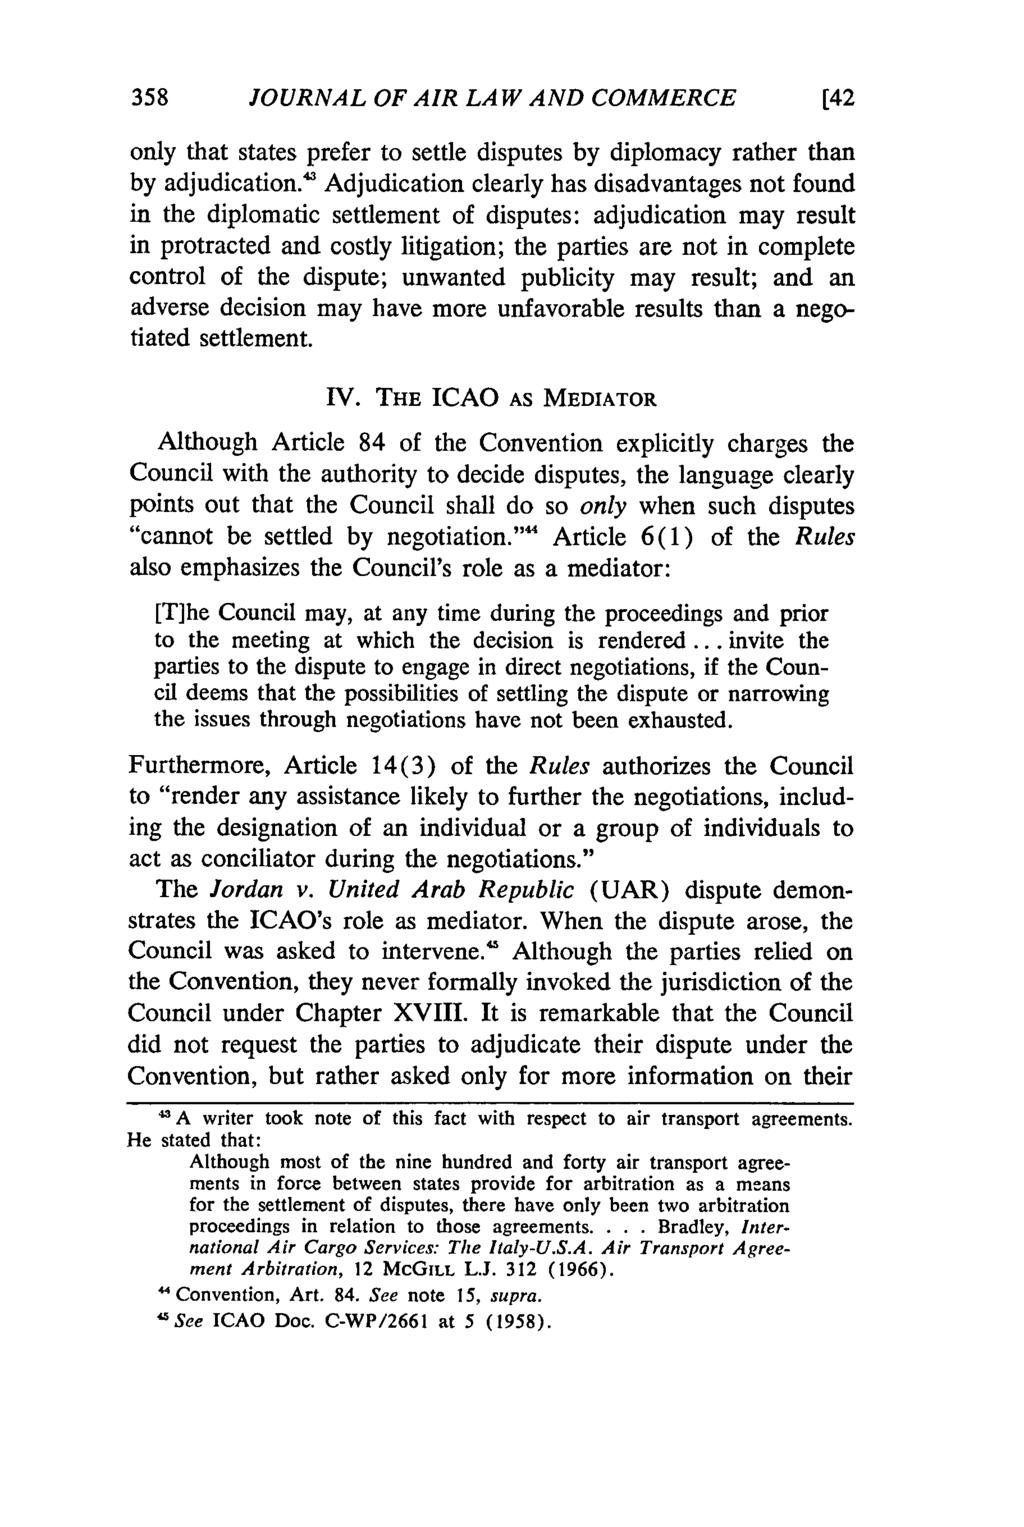 JOURNAL OF AIR LAW AND COMMERCE only that states prefer to settle disputes by diplomacy rather than by adjudication.